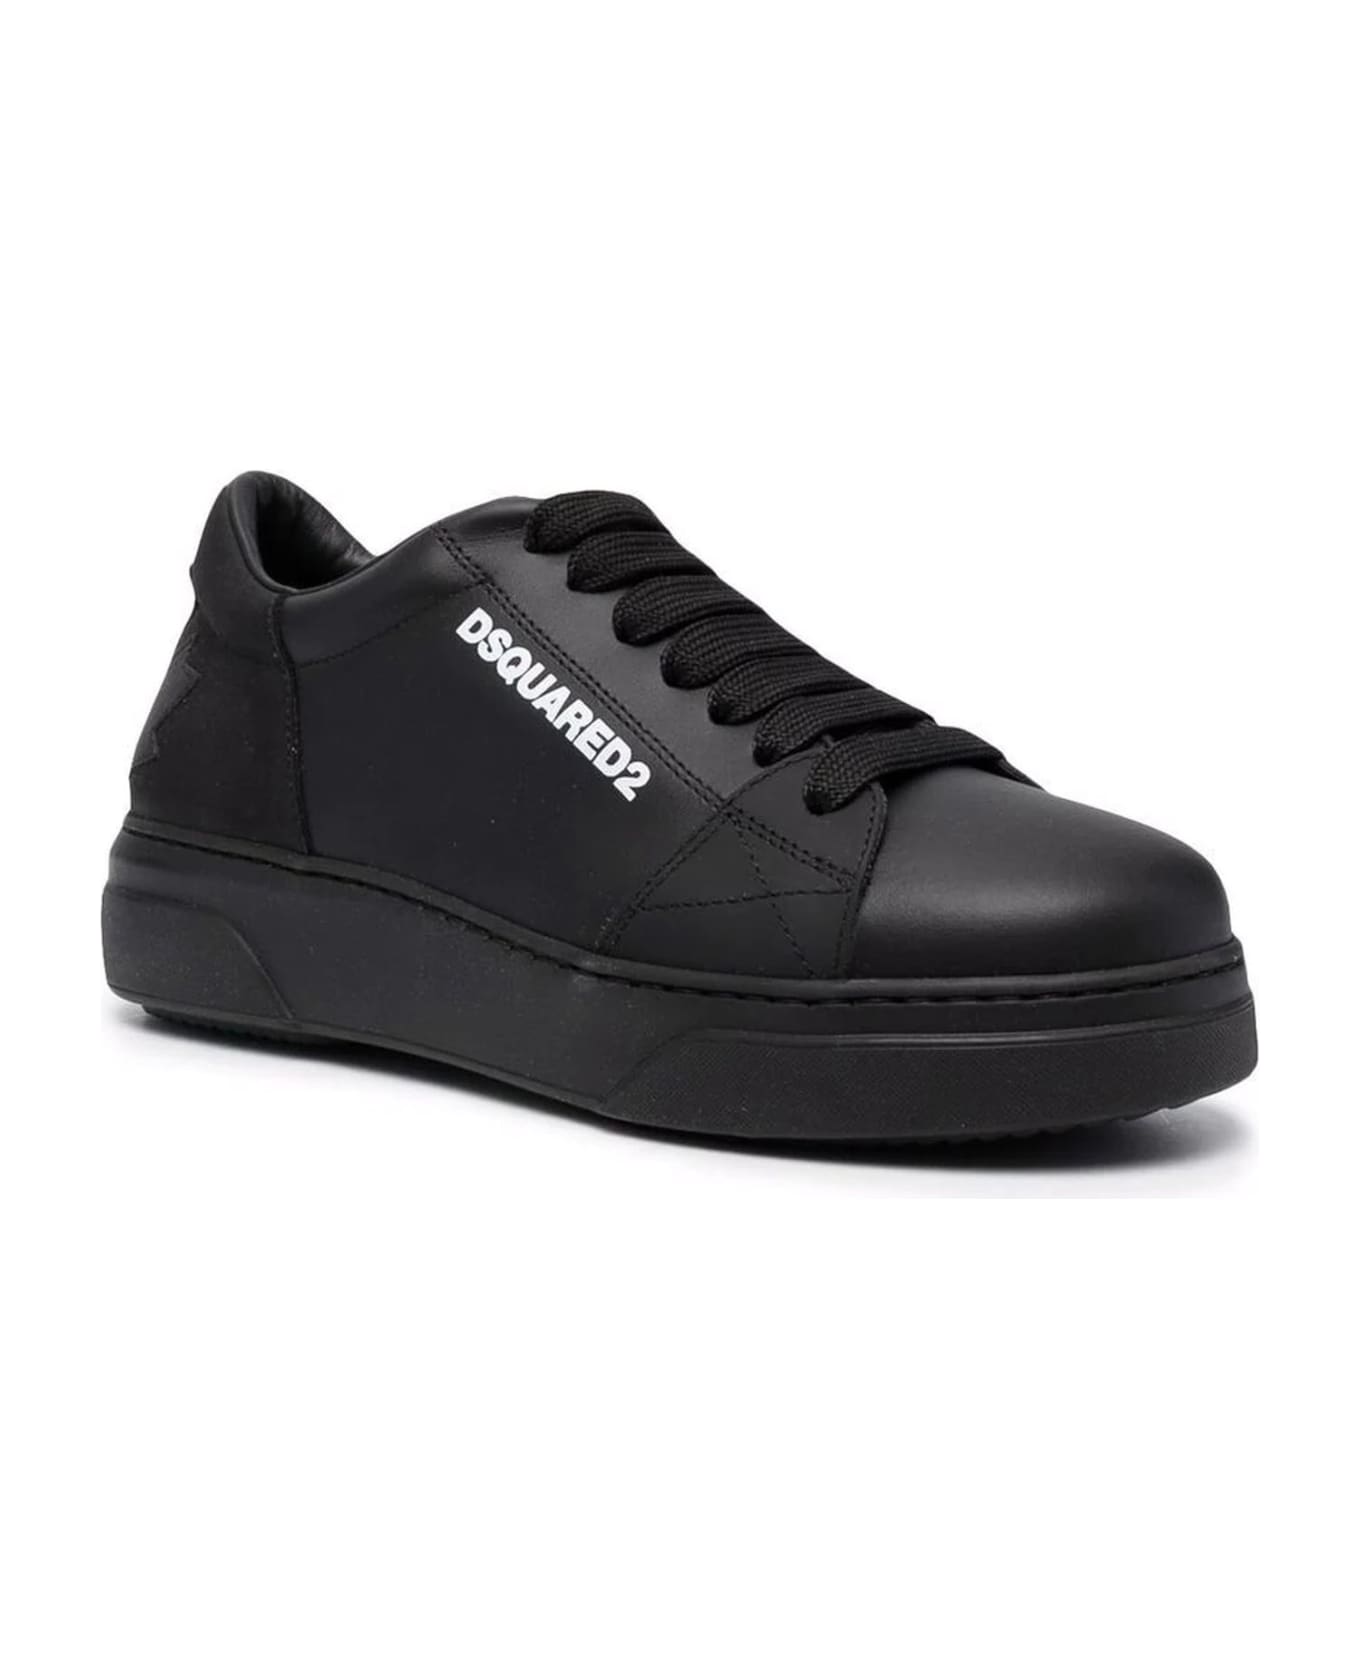 Dsquared2 Black Leather Sneakers - Black スニーカー